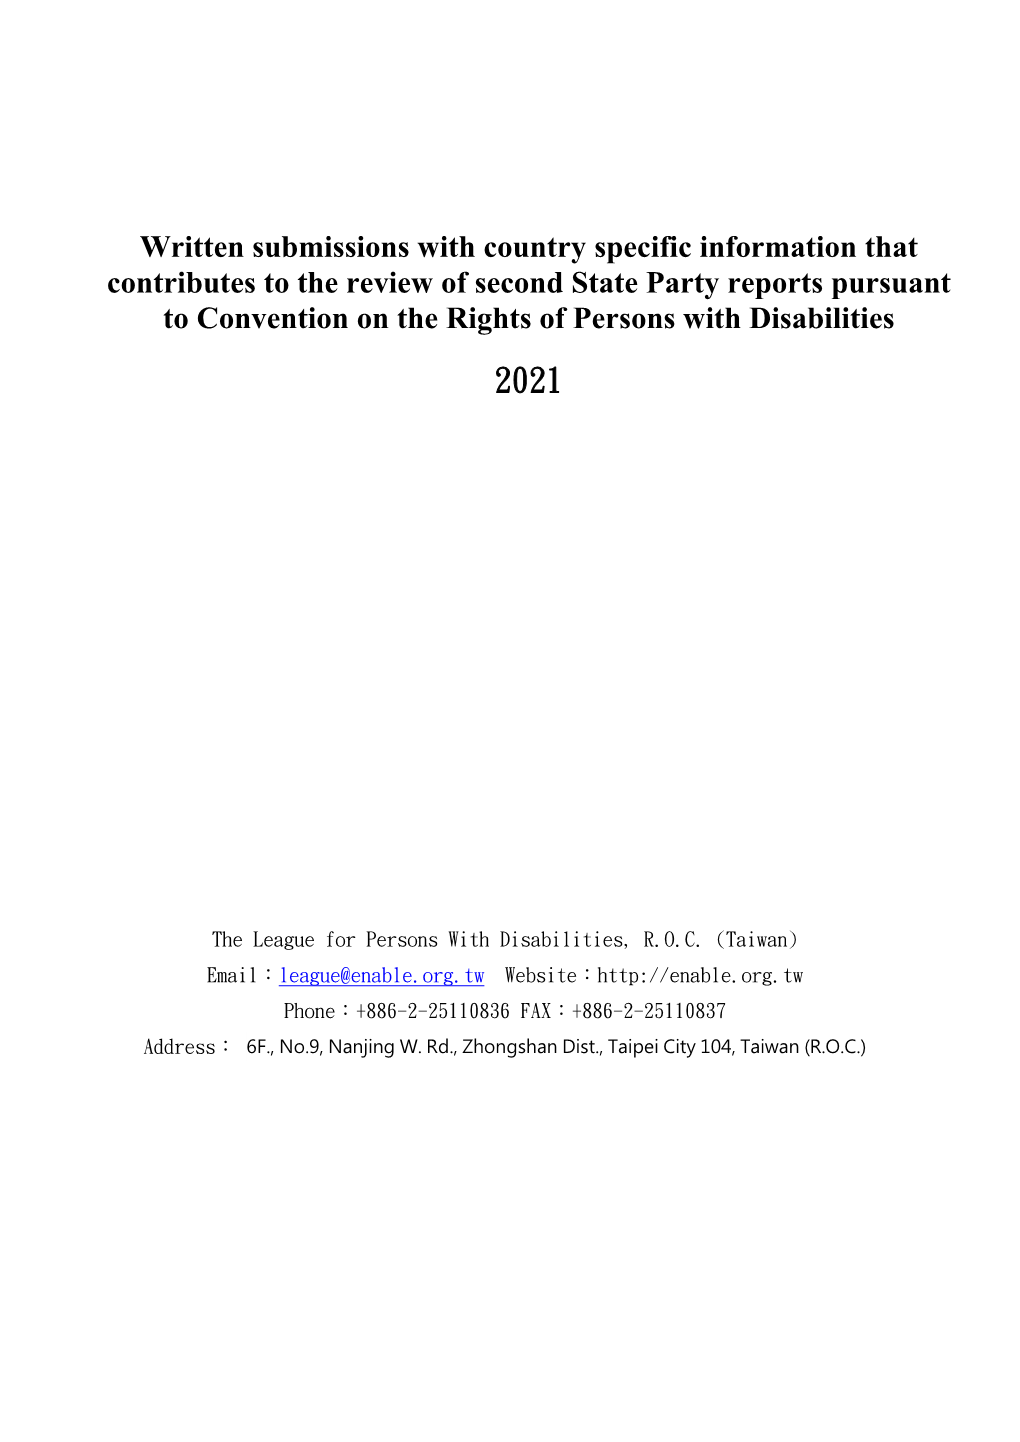 Written Submissions with Country Specific Information That Contributes